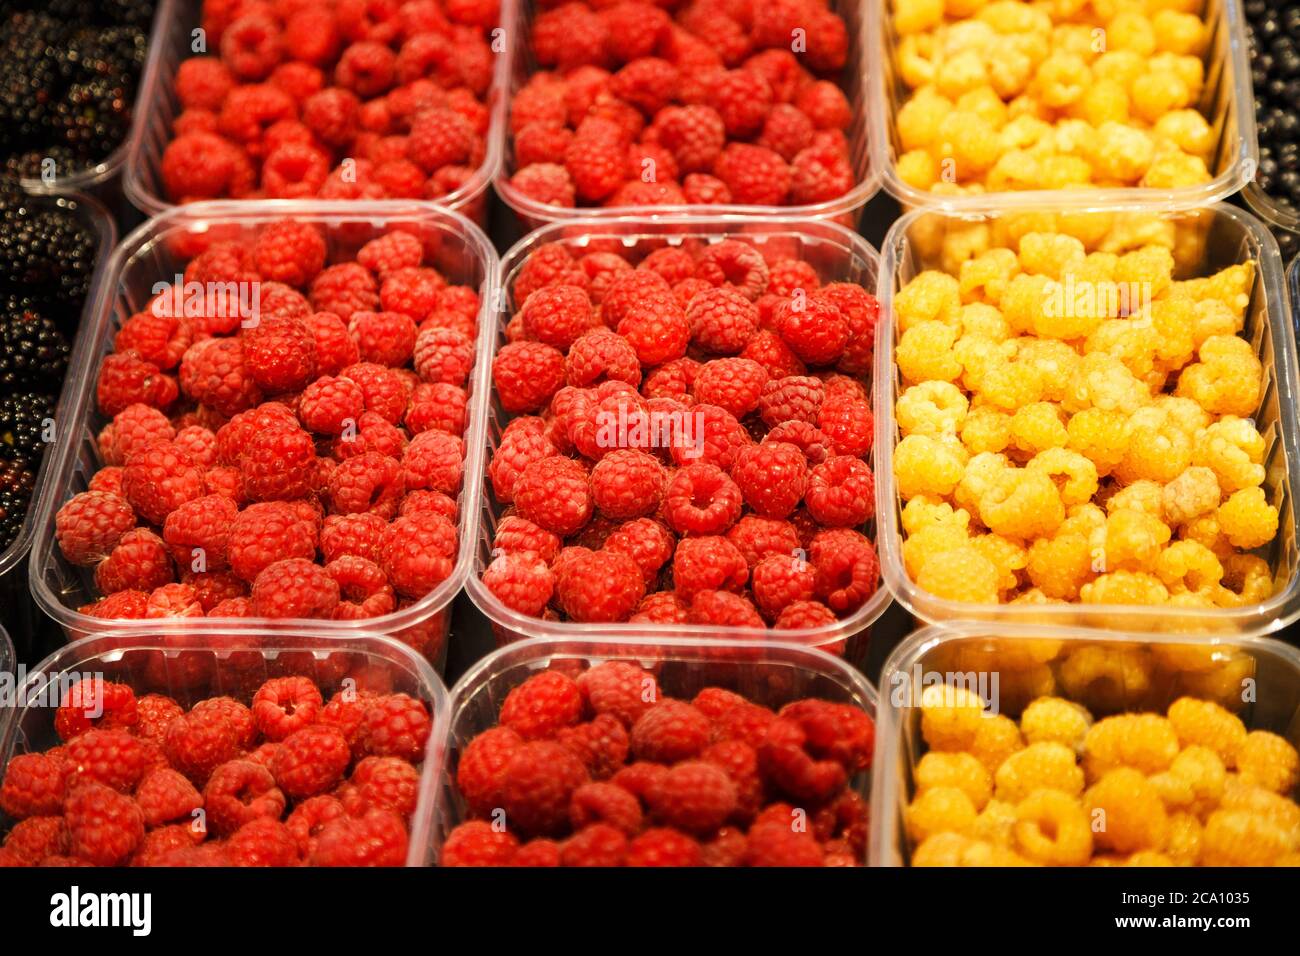 Colourful mix of different fresh berries at market Stock Photo